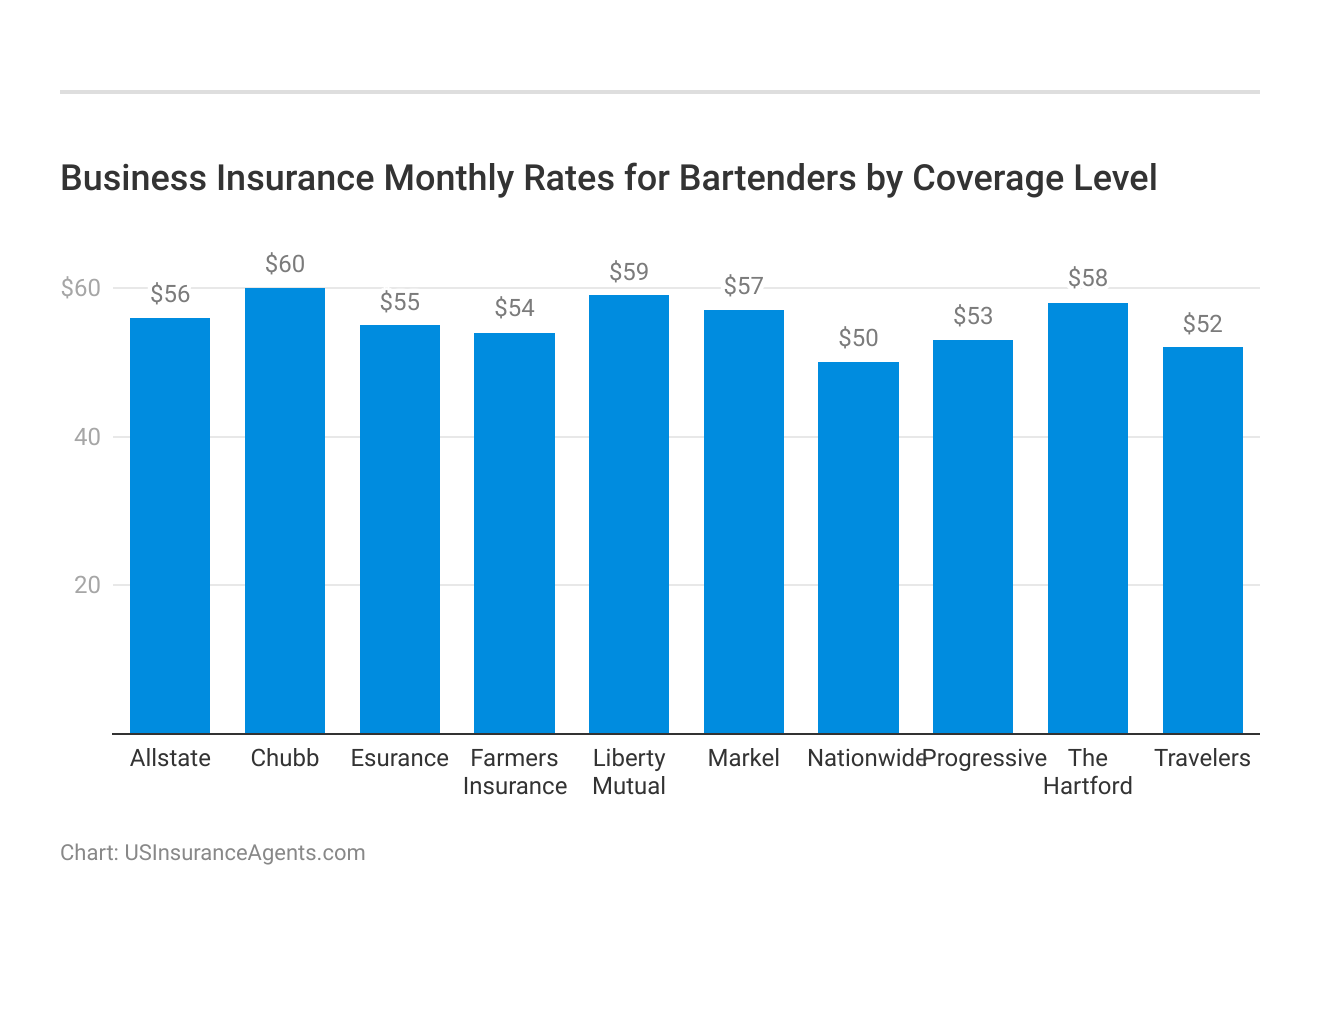 <h3>Business Insurance Monthly Rates for Bartenders by Coverage Level</h3>